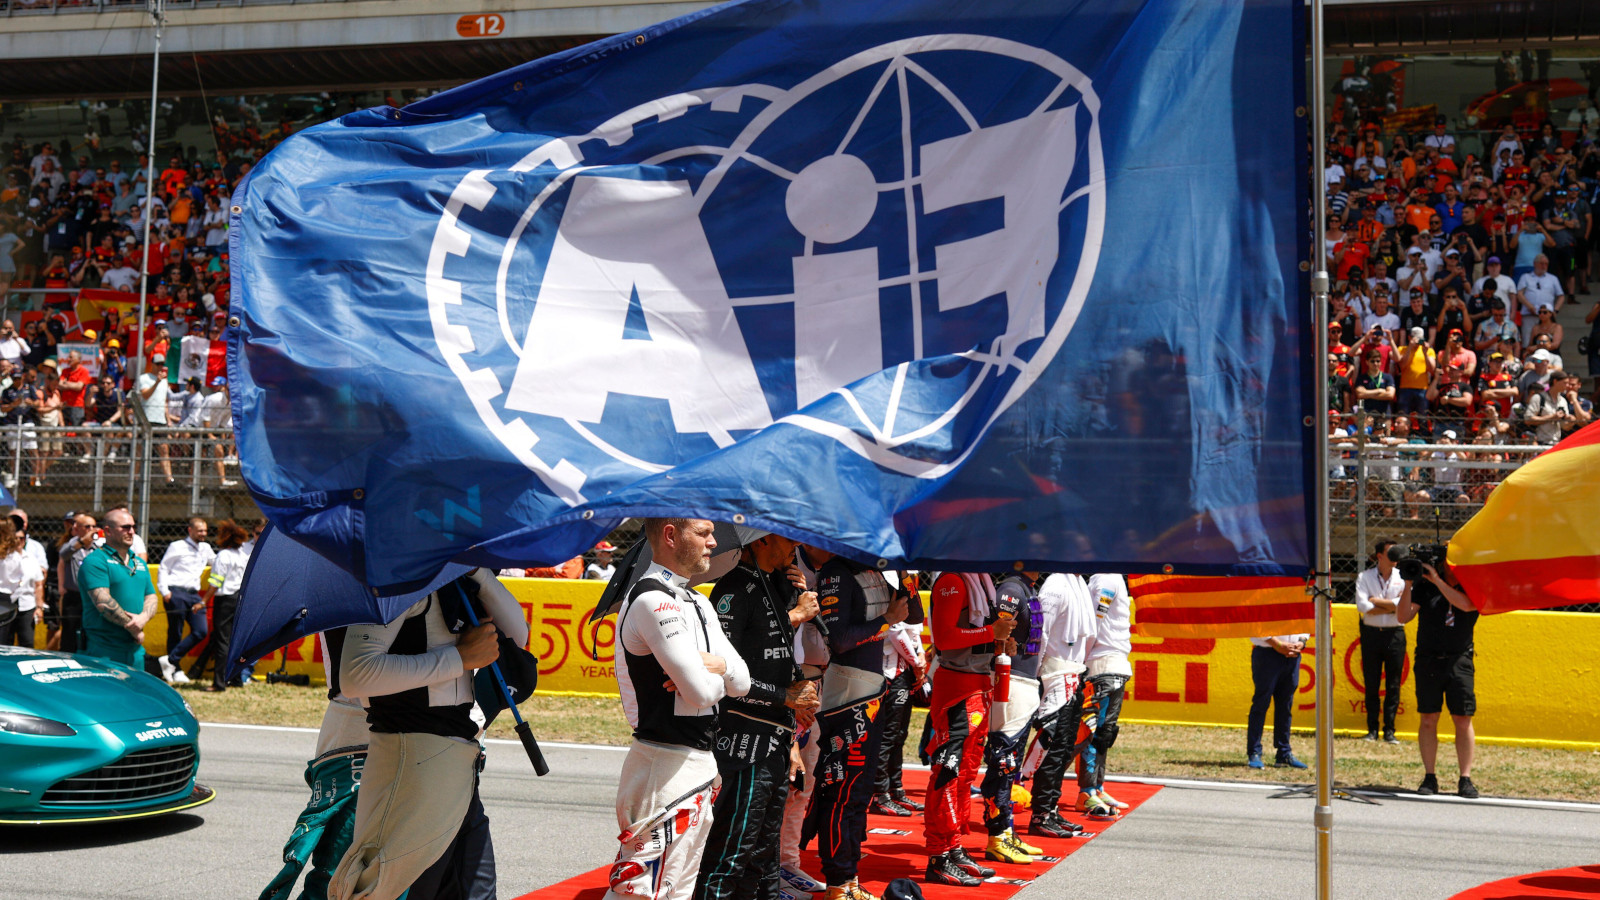 Drivers on the grid with the FIA flag. Spain May 2022